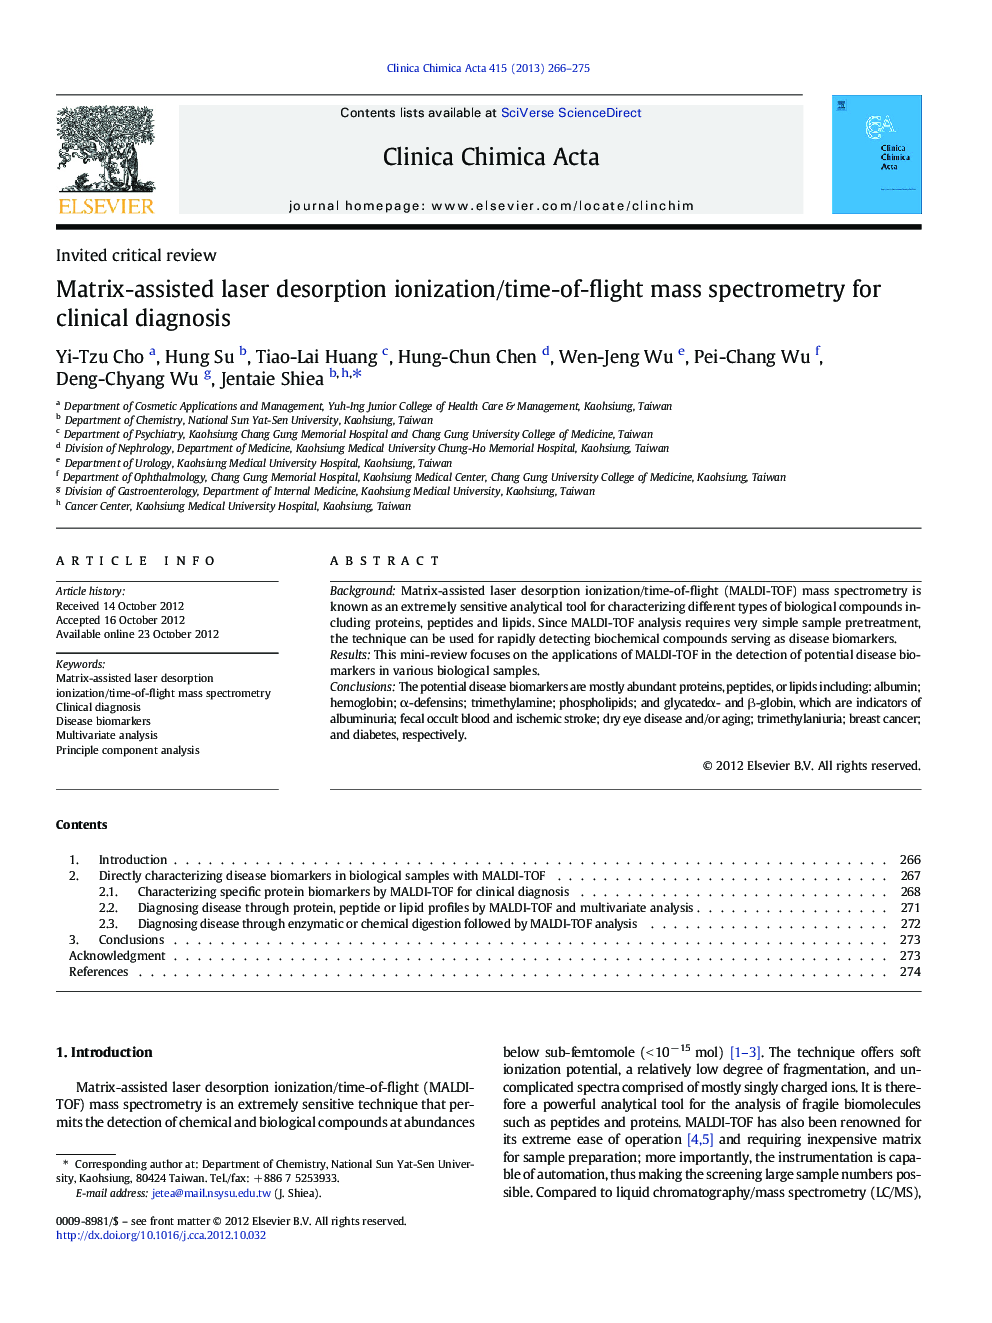 Matrix-assisted laser desorption ionization/time-of-flight mass spectrometry for clinical diagnosis